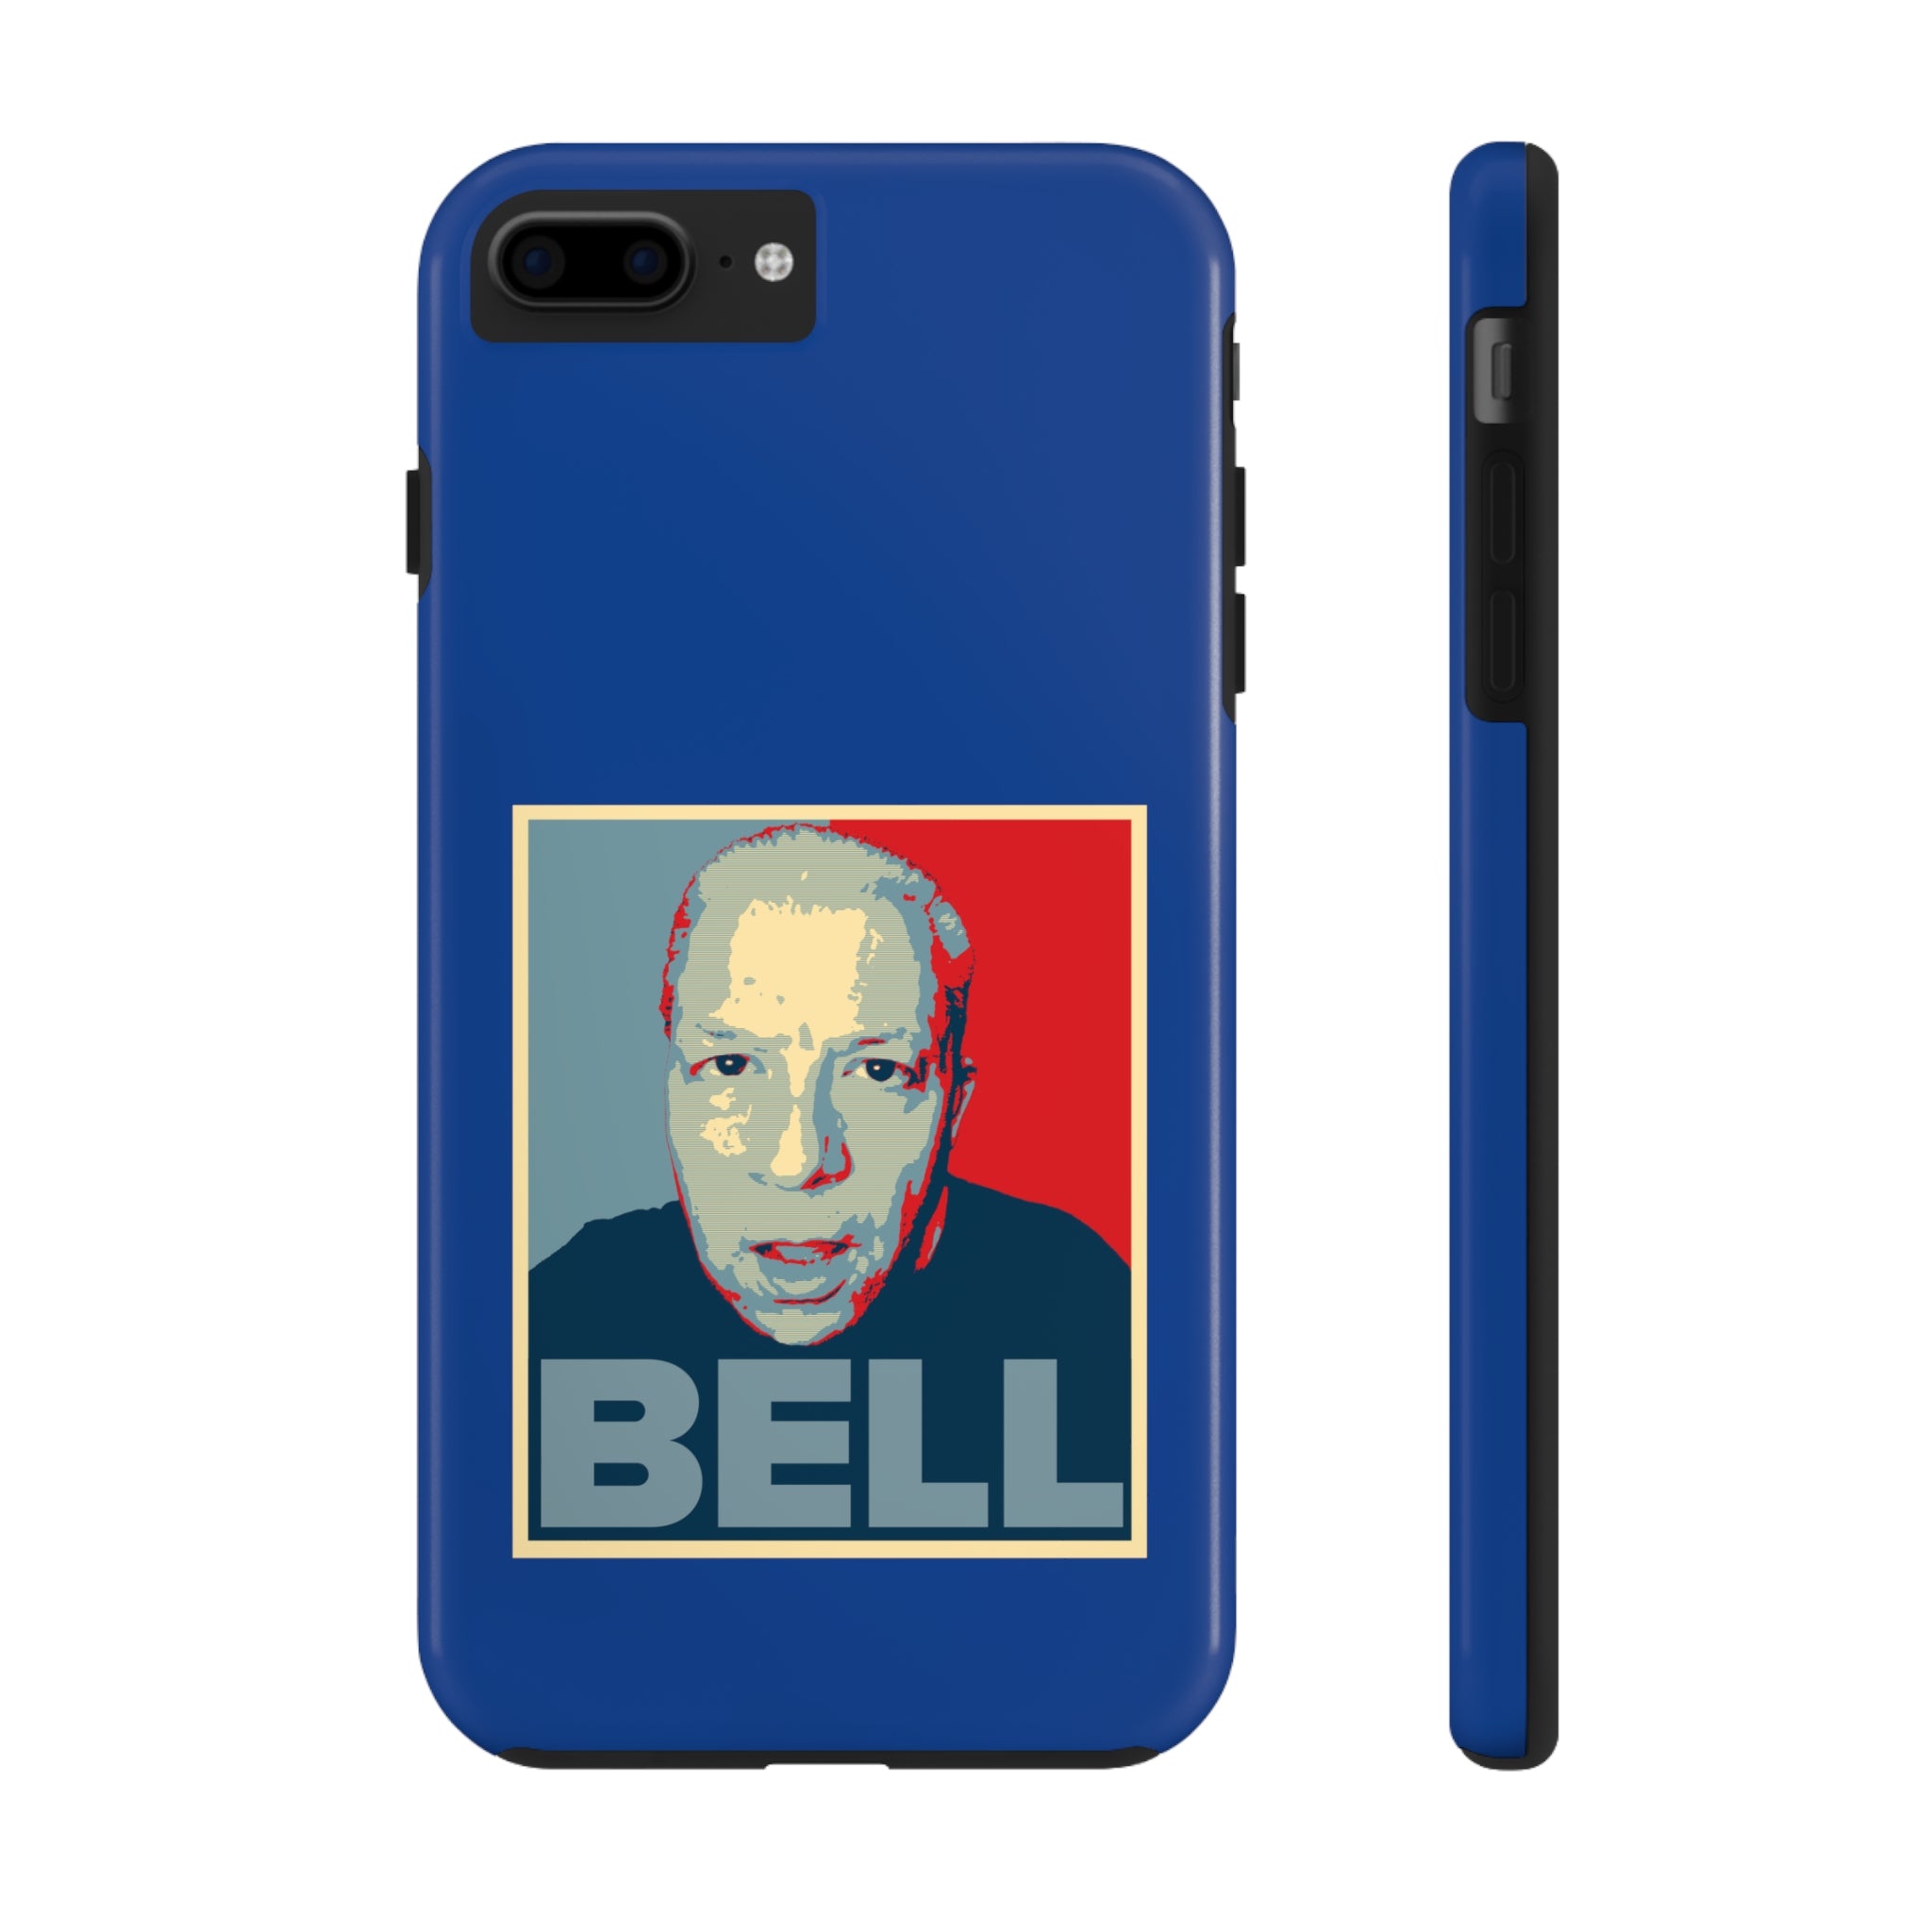 BELL Tough Phone Cases